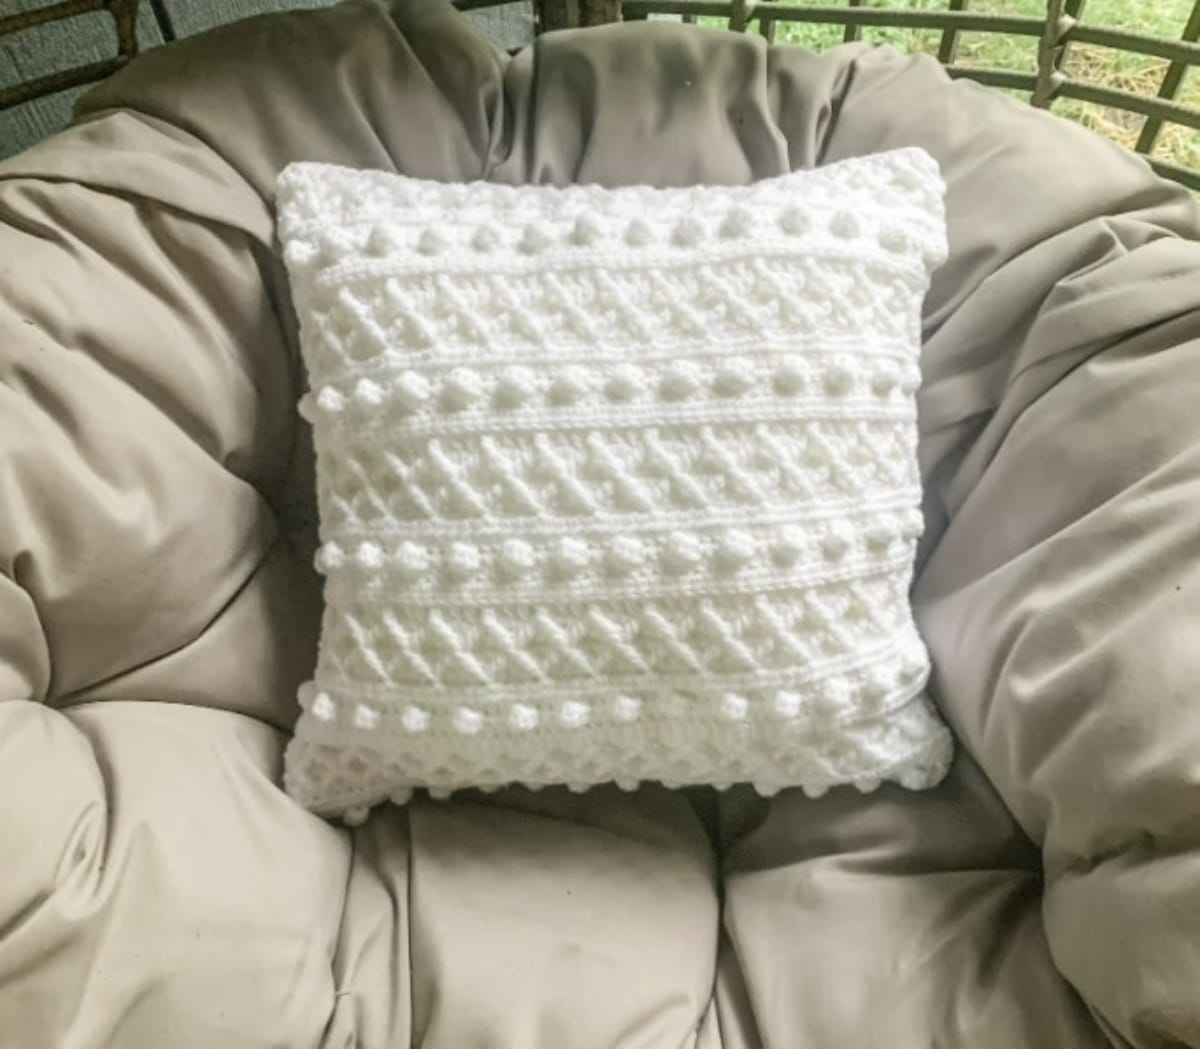 White crochet cushion with alternating rows of diamond shape pattern and small white bobbles on a gray chair.